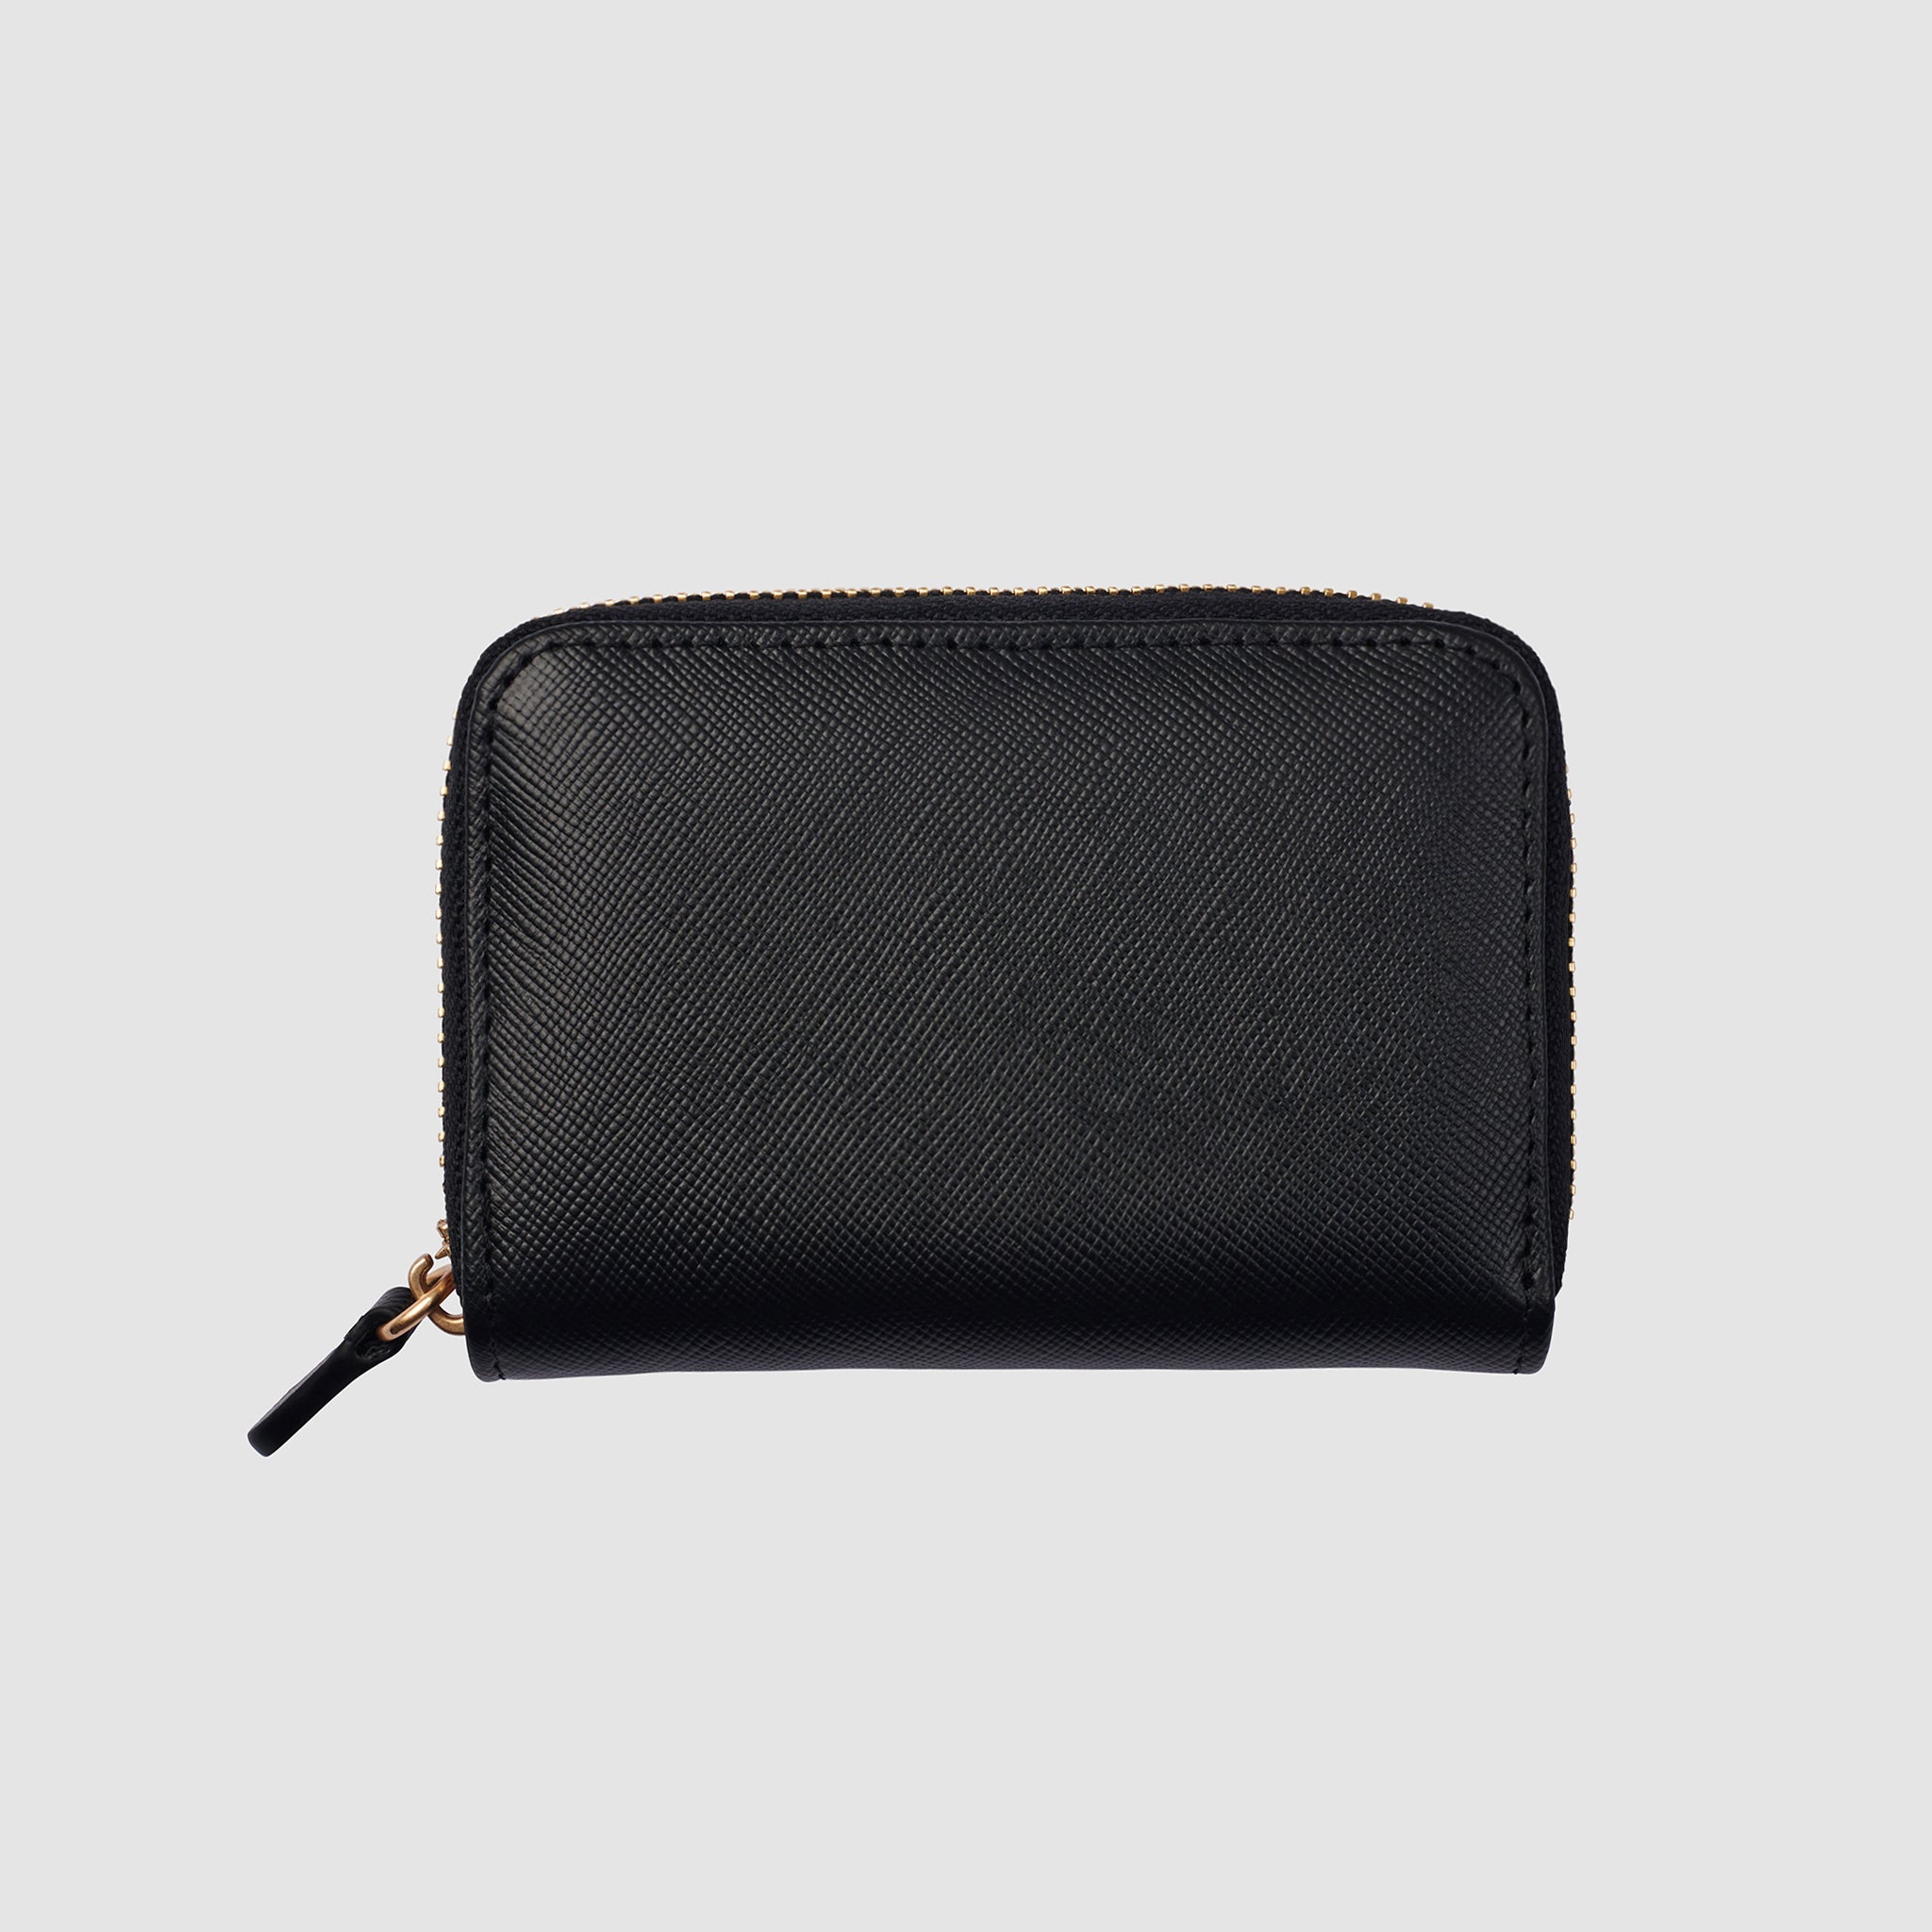 Personalised Small Zip Wallet Black Saffiano Leather with initials ...